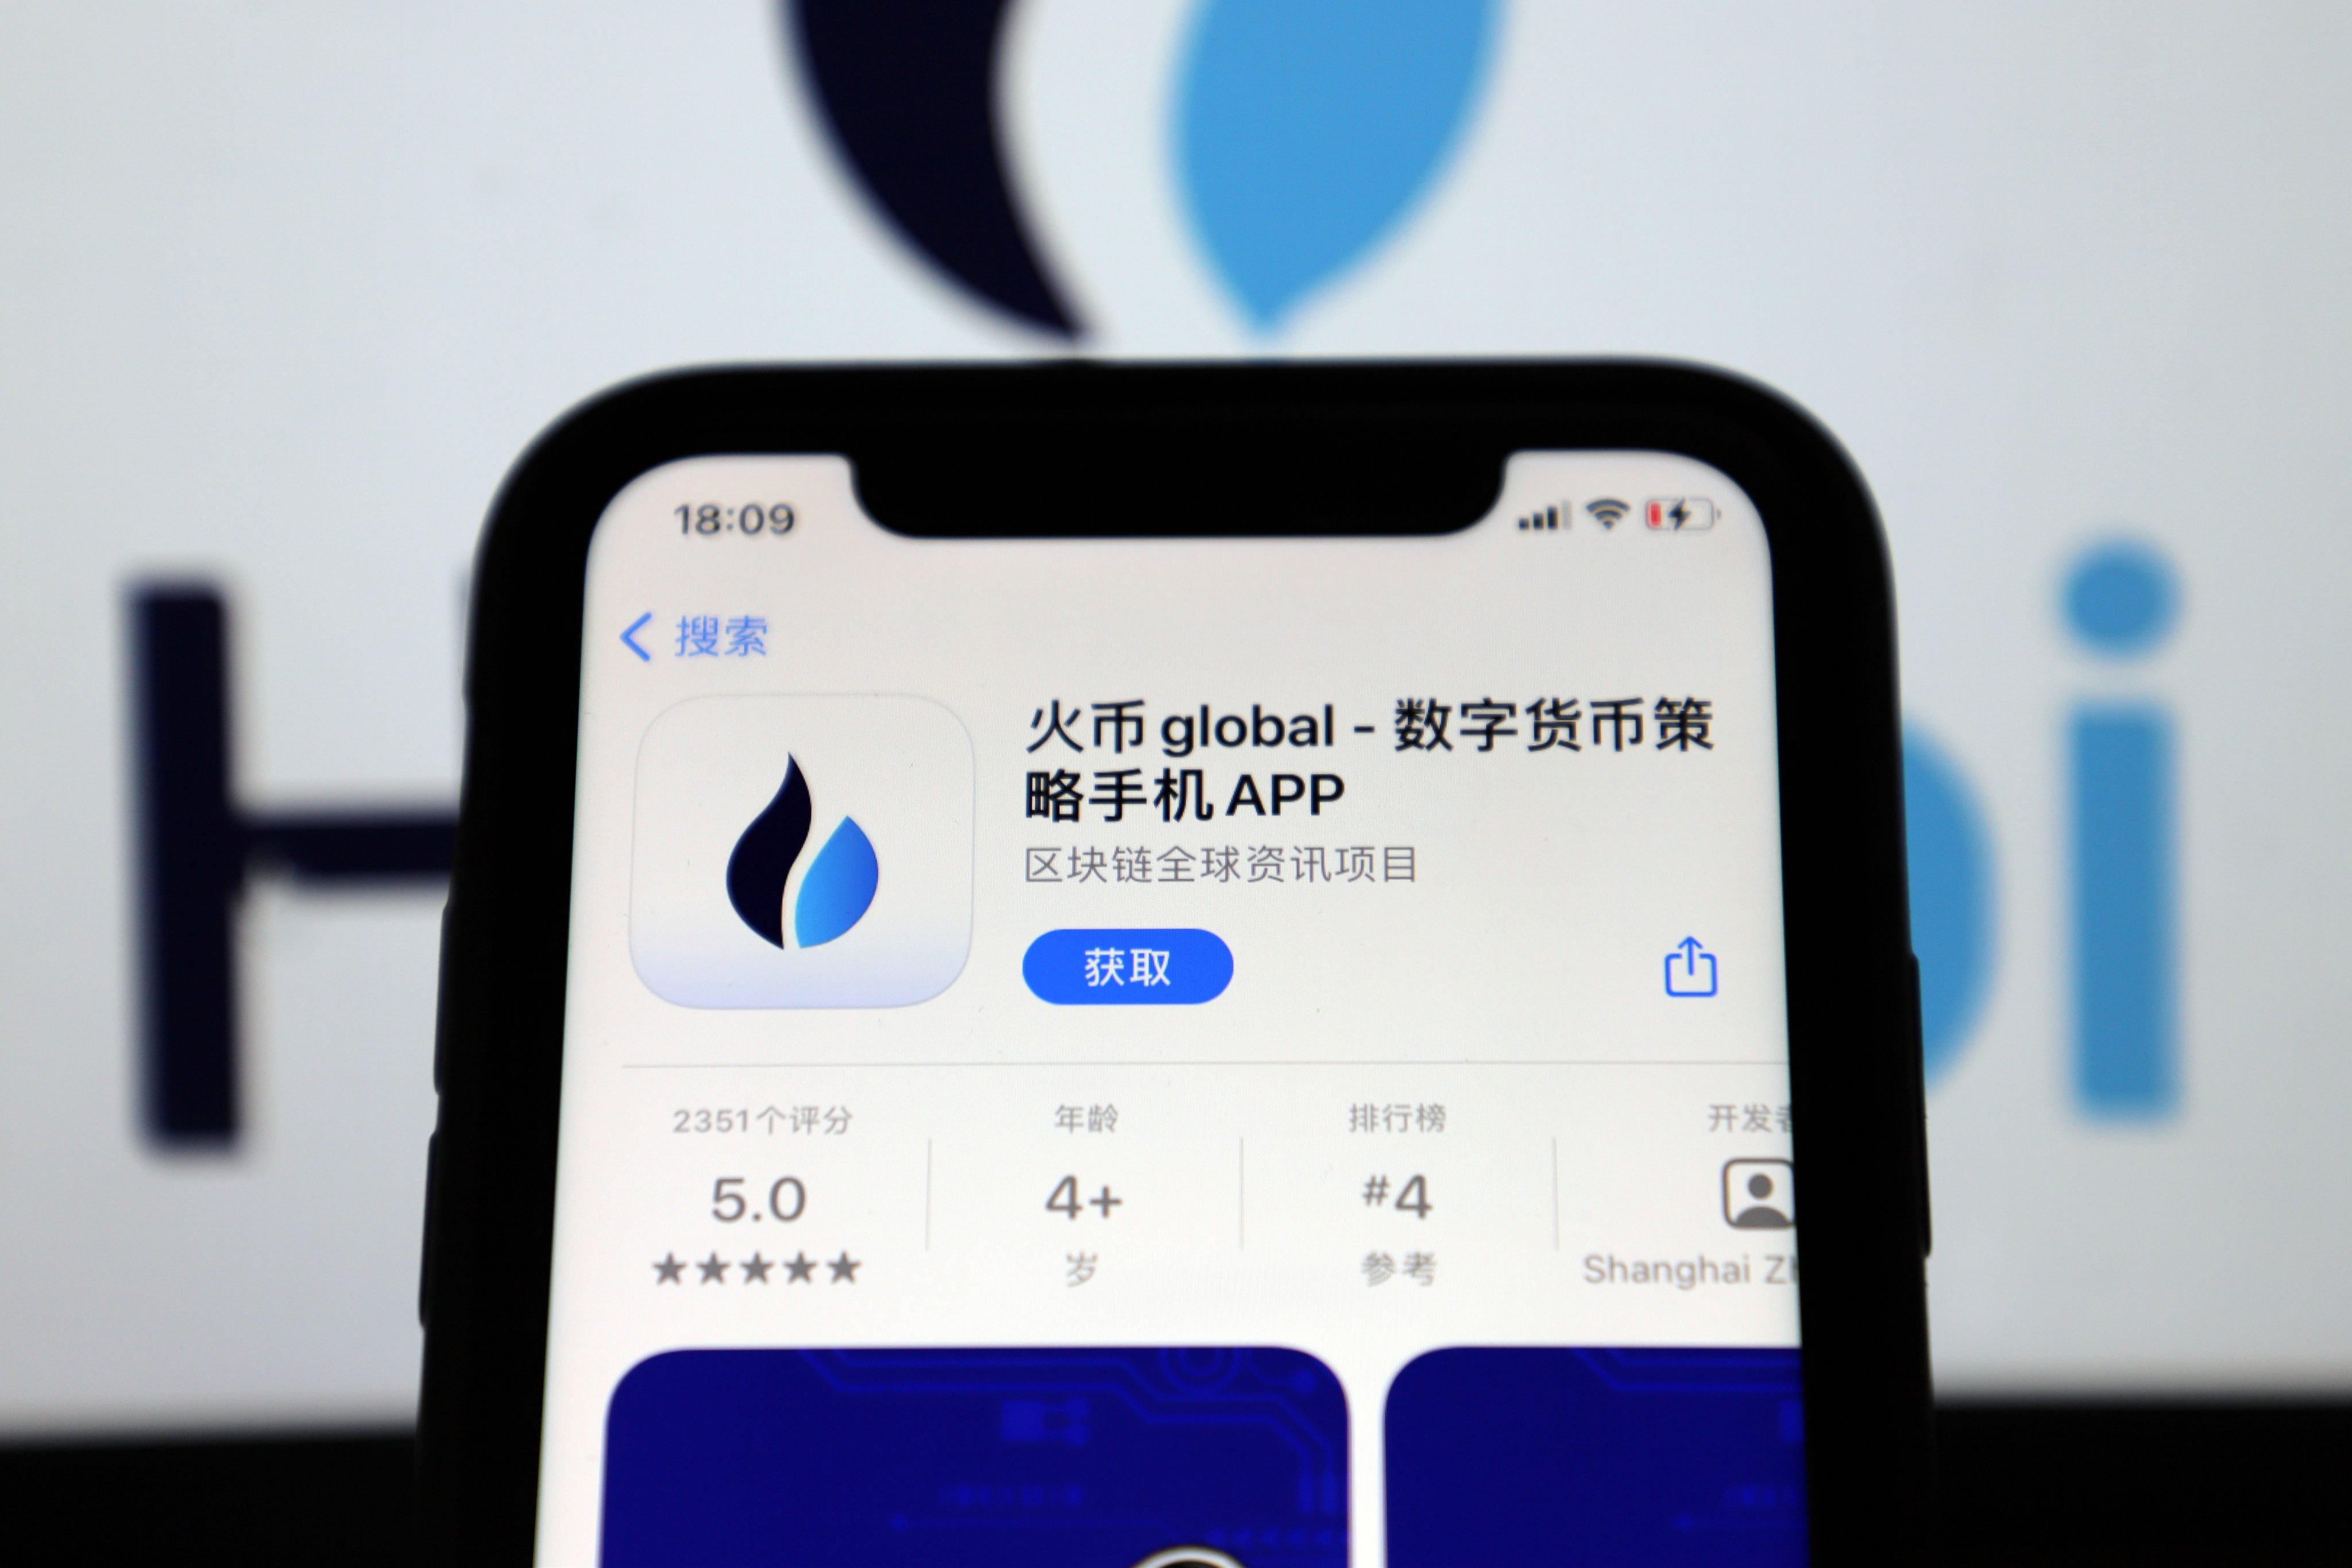 The app for cryptocurrency exchange Huobi, now known as HTX, on November 29, 2020. HTX lost US$30 million in a recent hack and the company is promising to compensate those affected. Photo: Barcroft Media via Getty Images